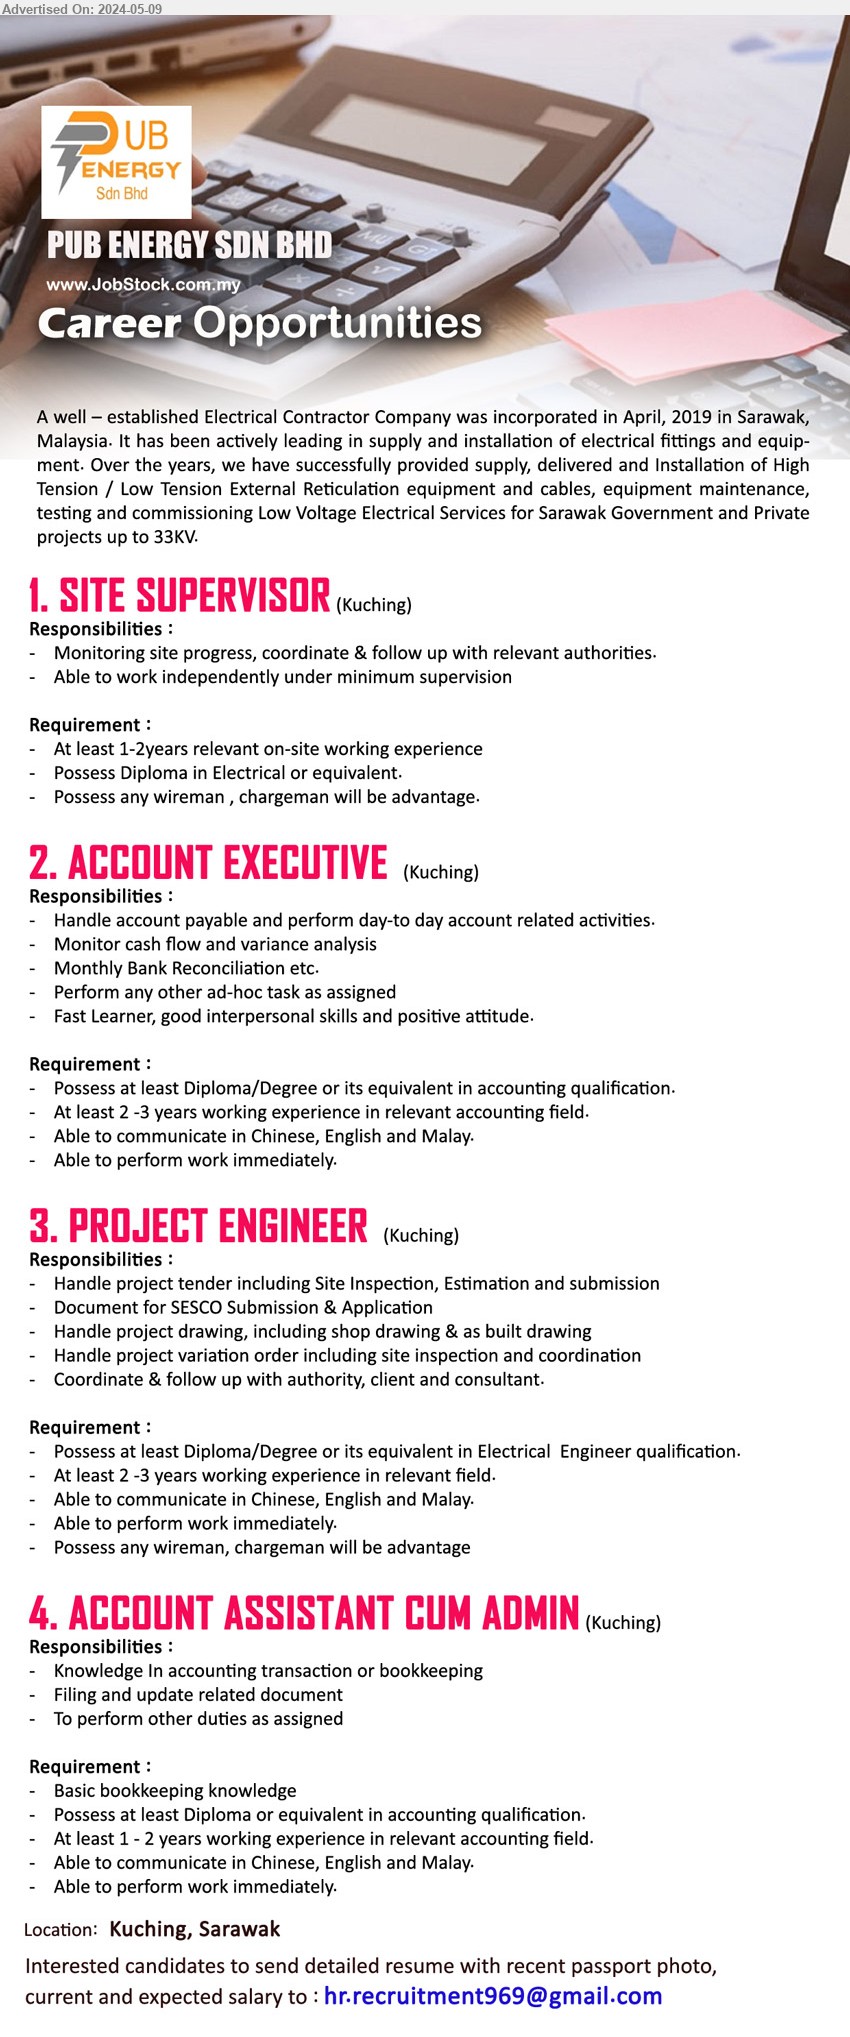 PUB ENERGY SDN BHD - 1. SITE SUPERVISOR (Kuching),  Diploma in Electrical, Possess any wireman , chargeman will be advantage.,...
2. ACCOUNT EXECUTIVE (Kuching), Diploma/Degree or its equivalent in accounting,...
3. PROJECT ENGINEER  (Kuching), Diploma/Degree or its equivalent in Electrical  Engineer ,...
4. ACCOUNT ASSISTANT CUM ADMIN (Kuching), Basic bookkeeping knowledge, Possess at least Diploma or equivalent in accounting qualification.,...
Email resume to ...